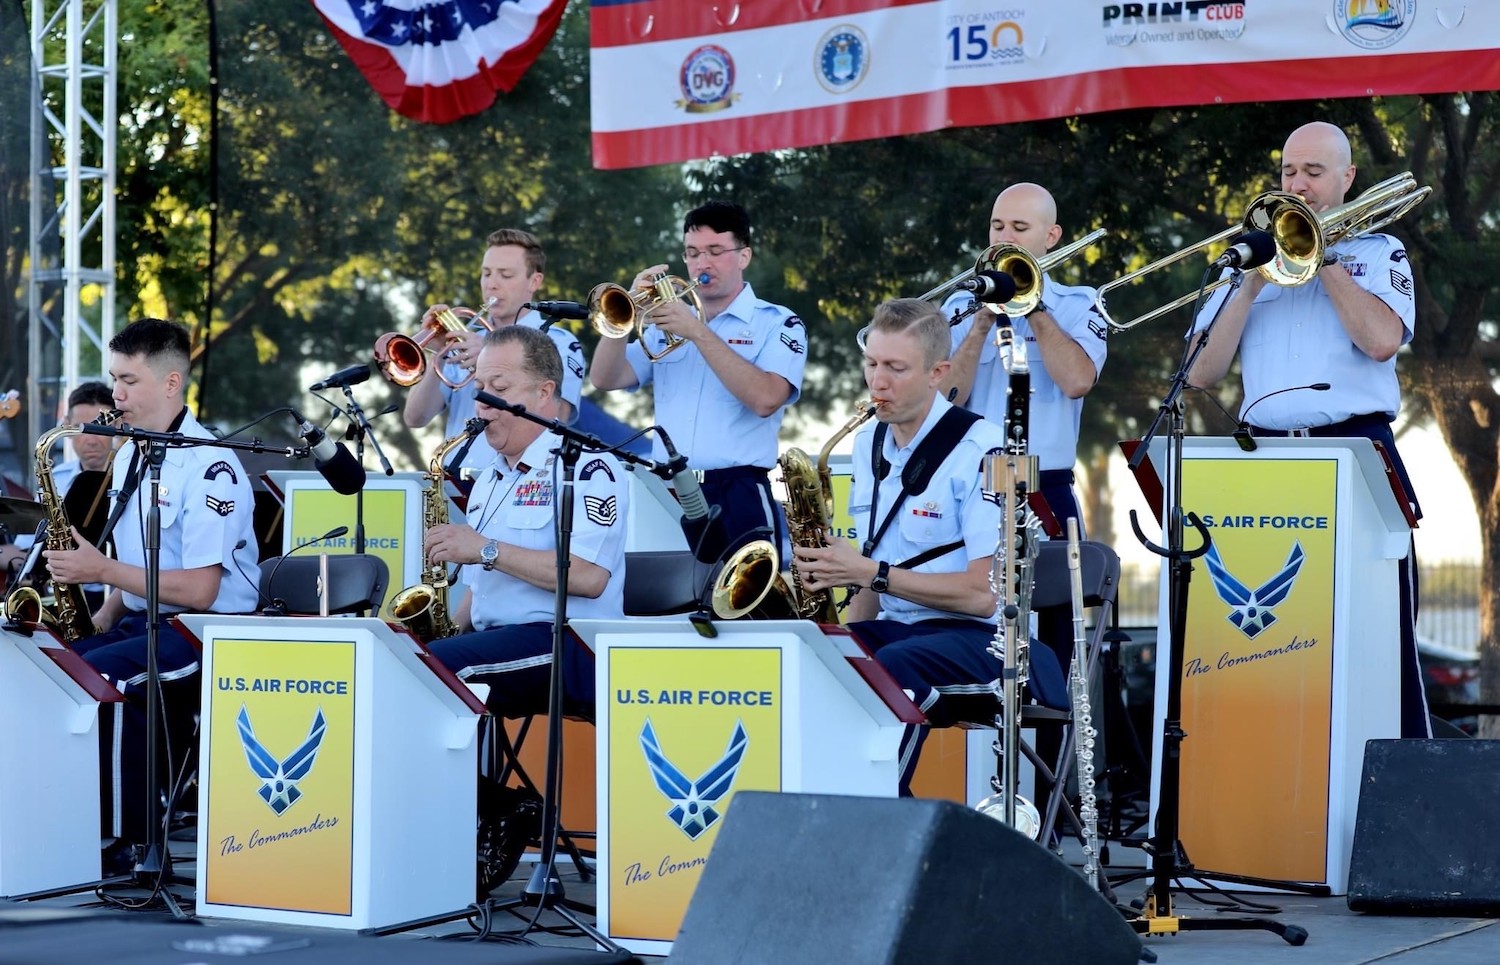 Air Force jazz band coming to Carson City Serving Carson City for over 150 years